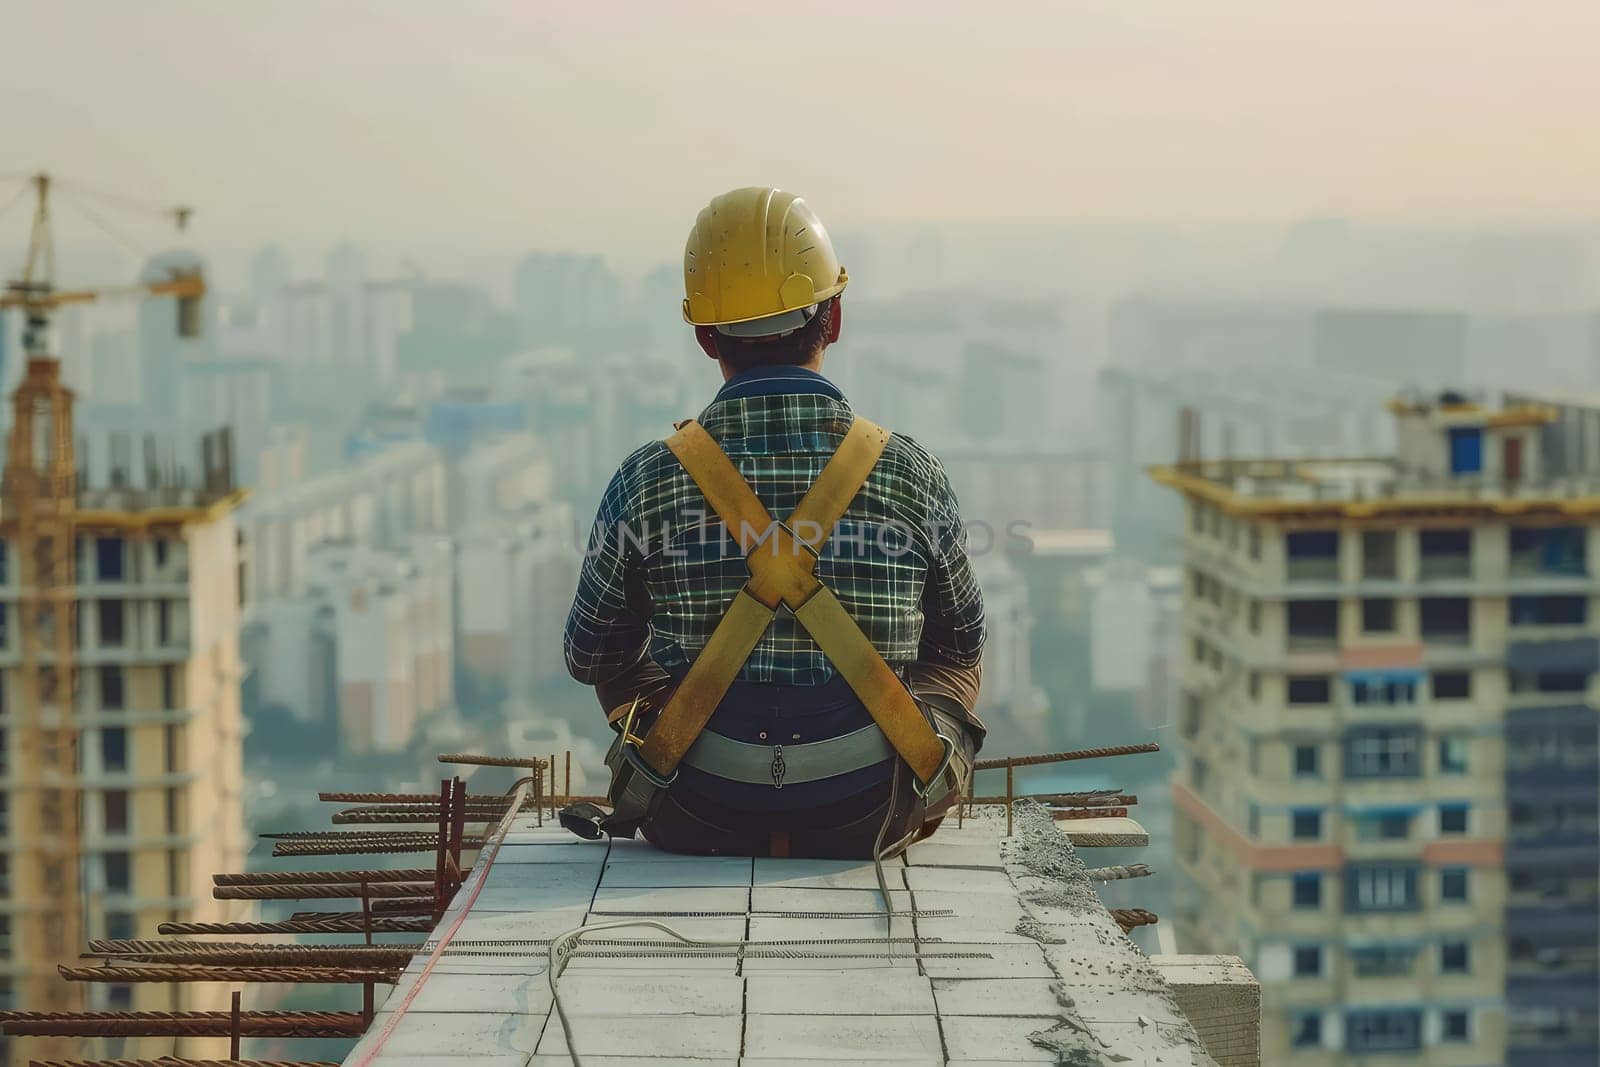 Construction Worker in Safety Gear Installing Roof Tiles with Precision and Care. by Dvorak